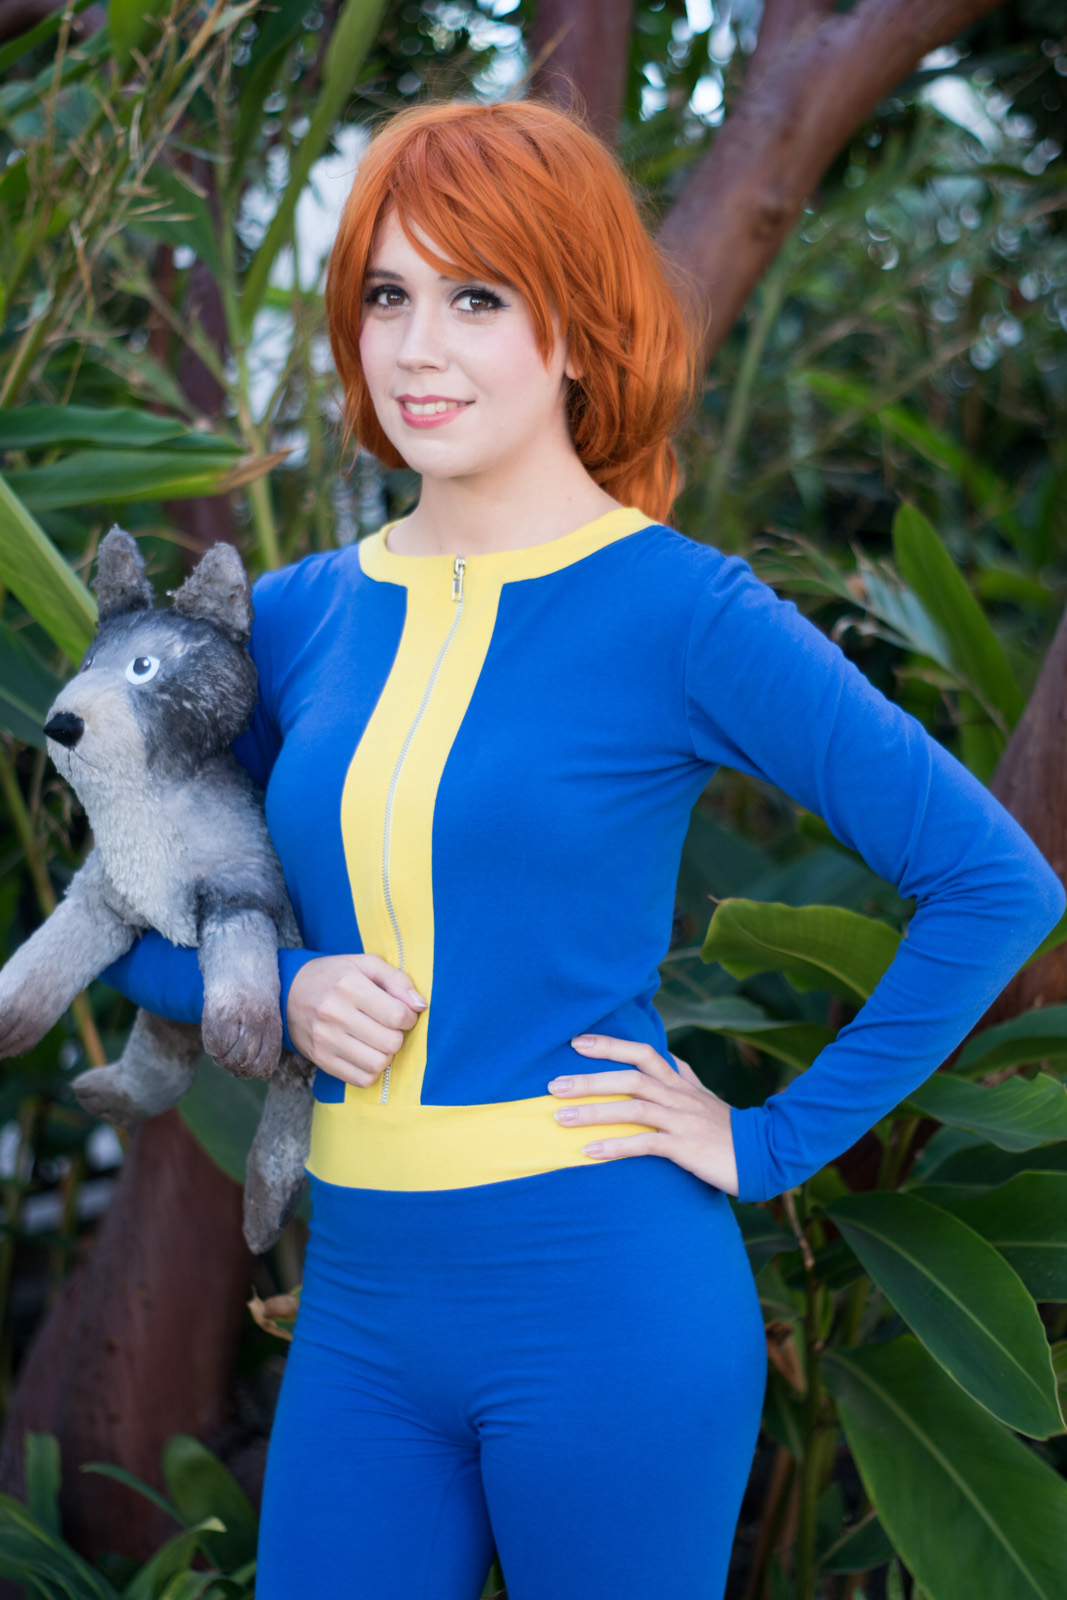 Vault Dweller From Fallout 1 By Varnani